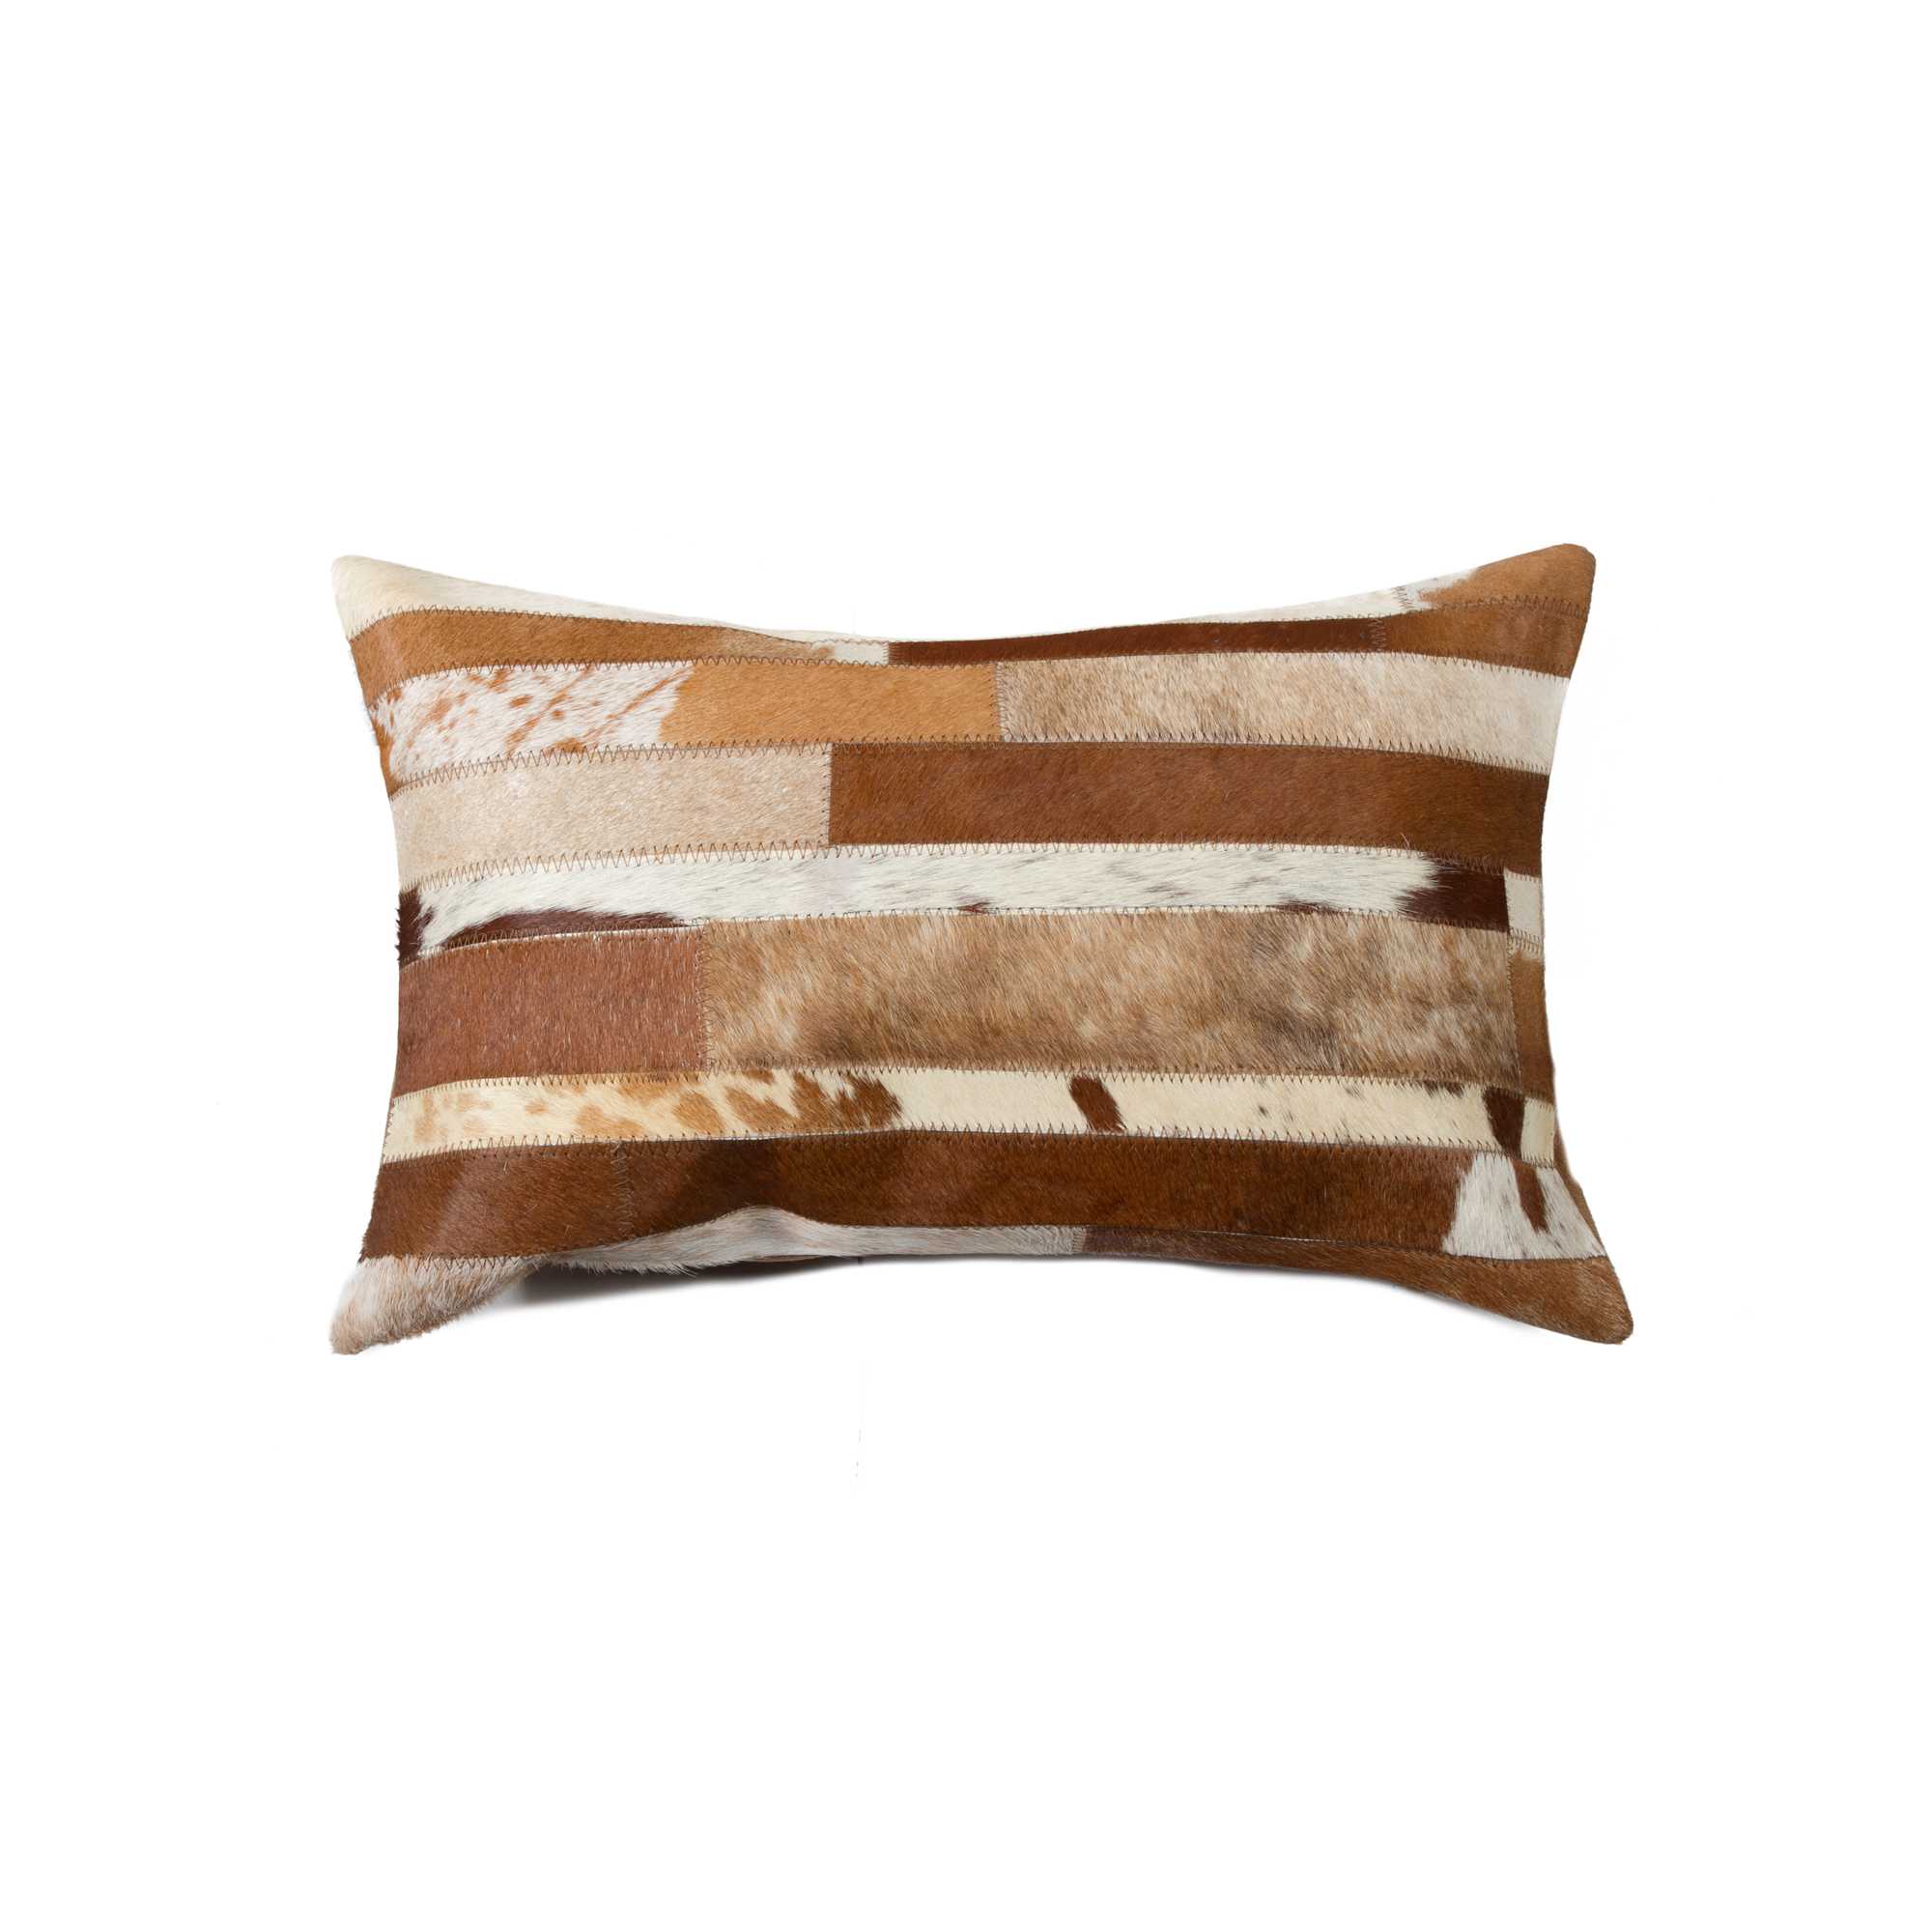 12" x 20" x 5" Brown And White - Pillow